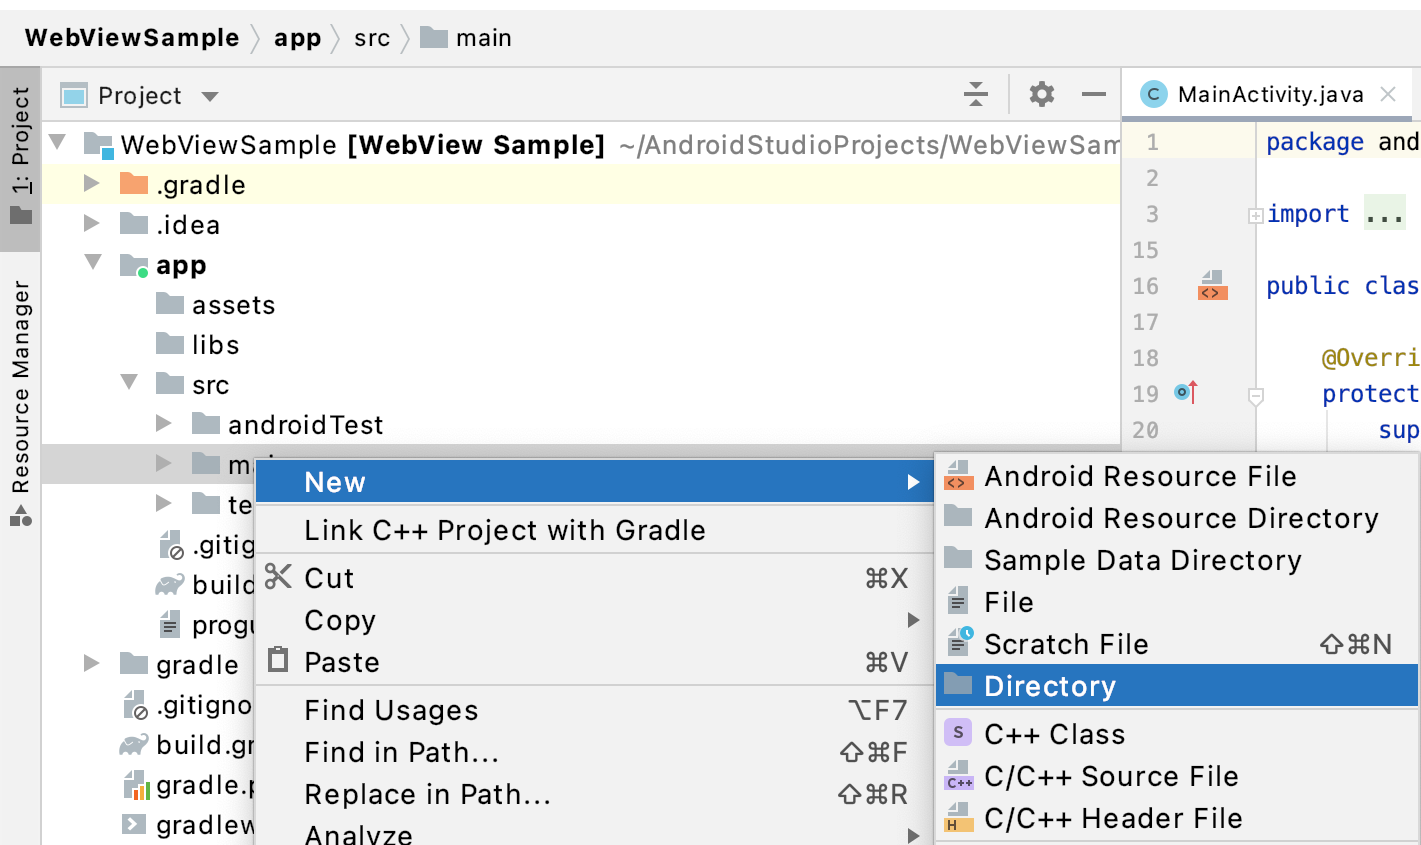 An image showing Android Studio create-directory menus